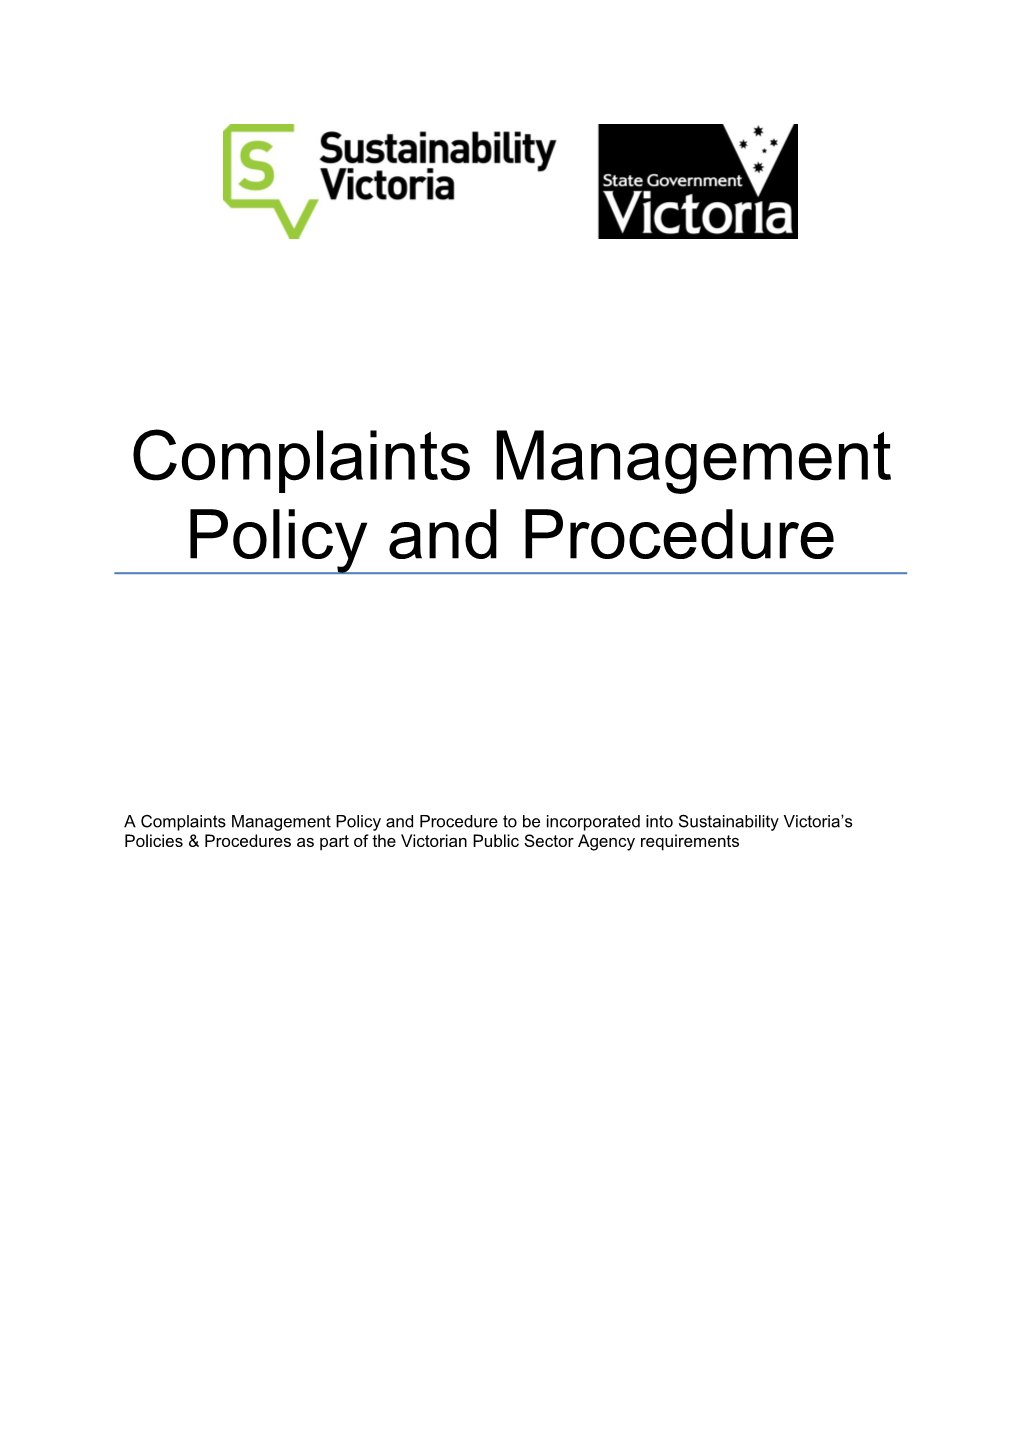 Complaints Management Policy and Procedure